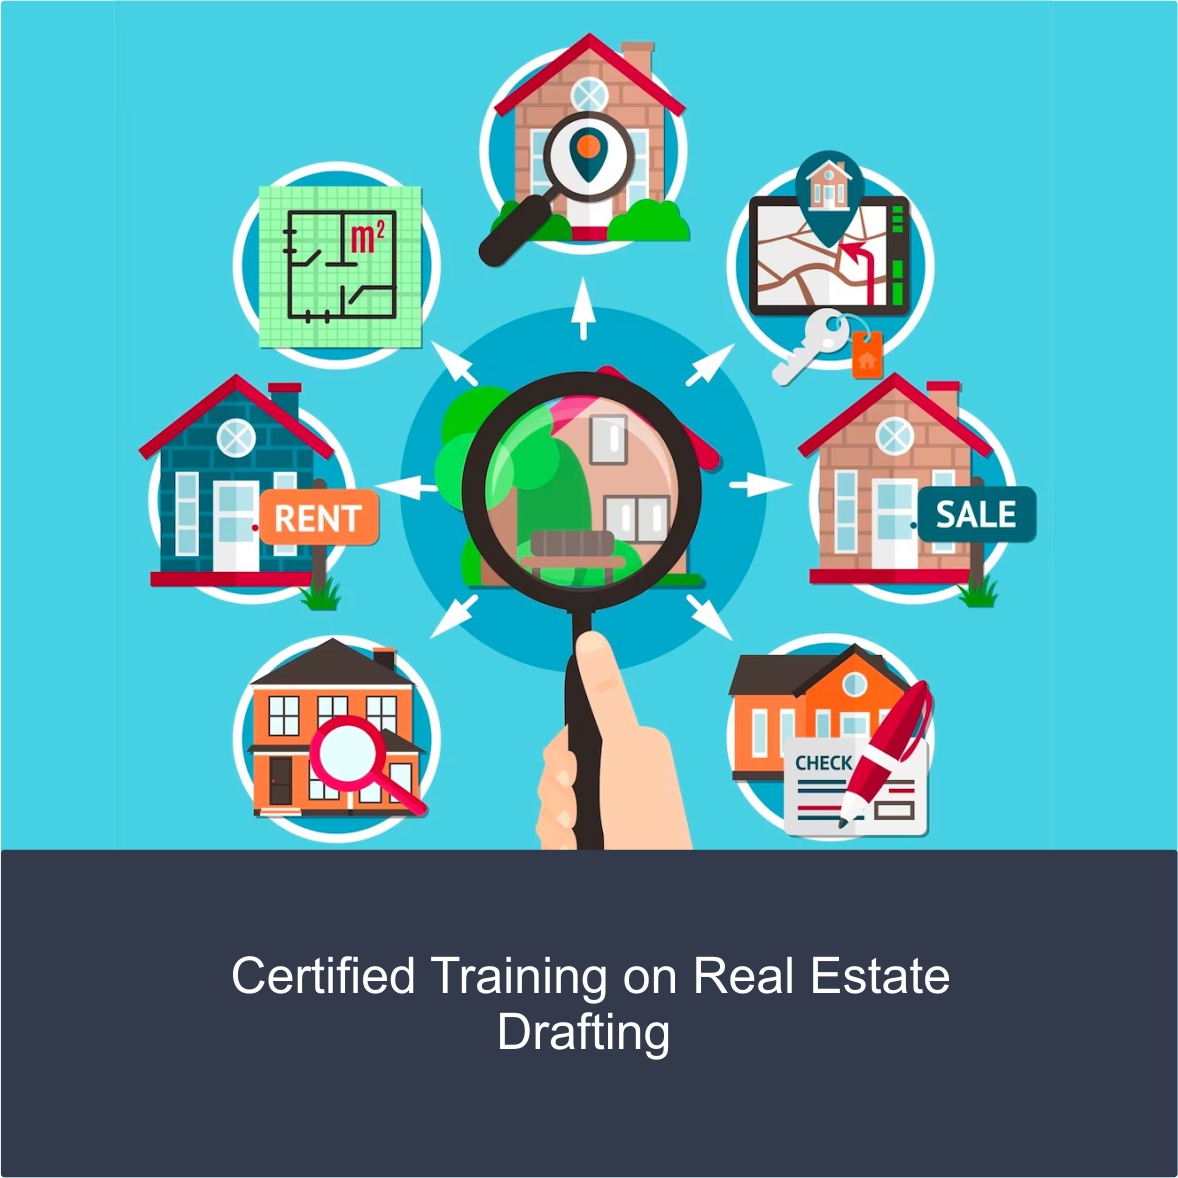 Certified Training on Real Estate Drafting